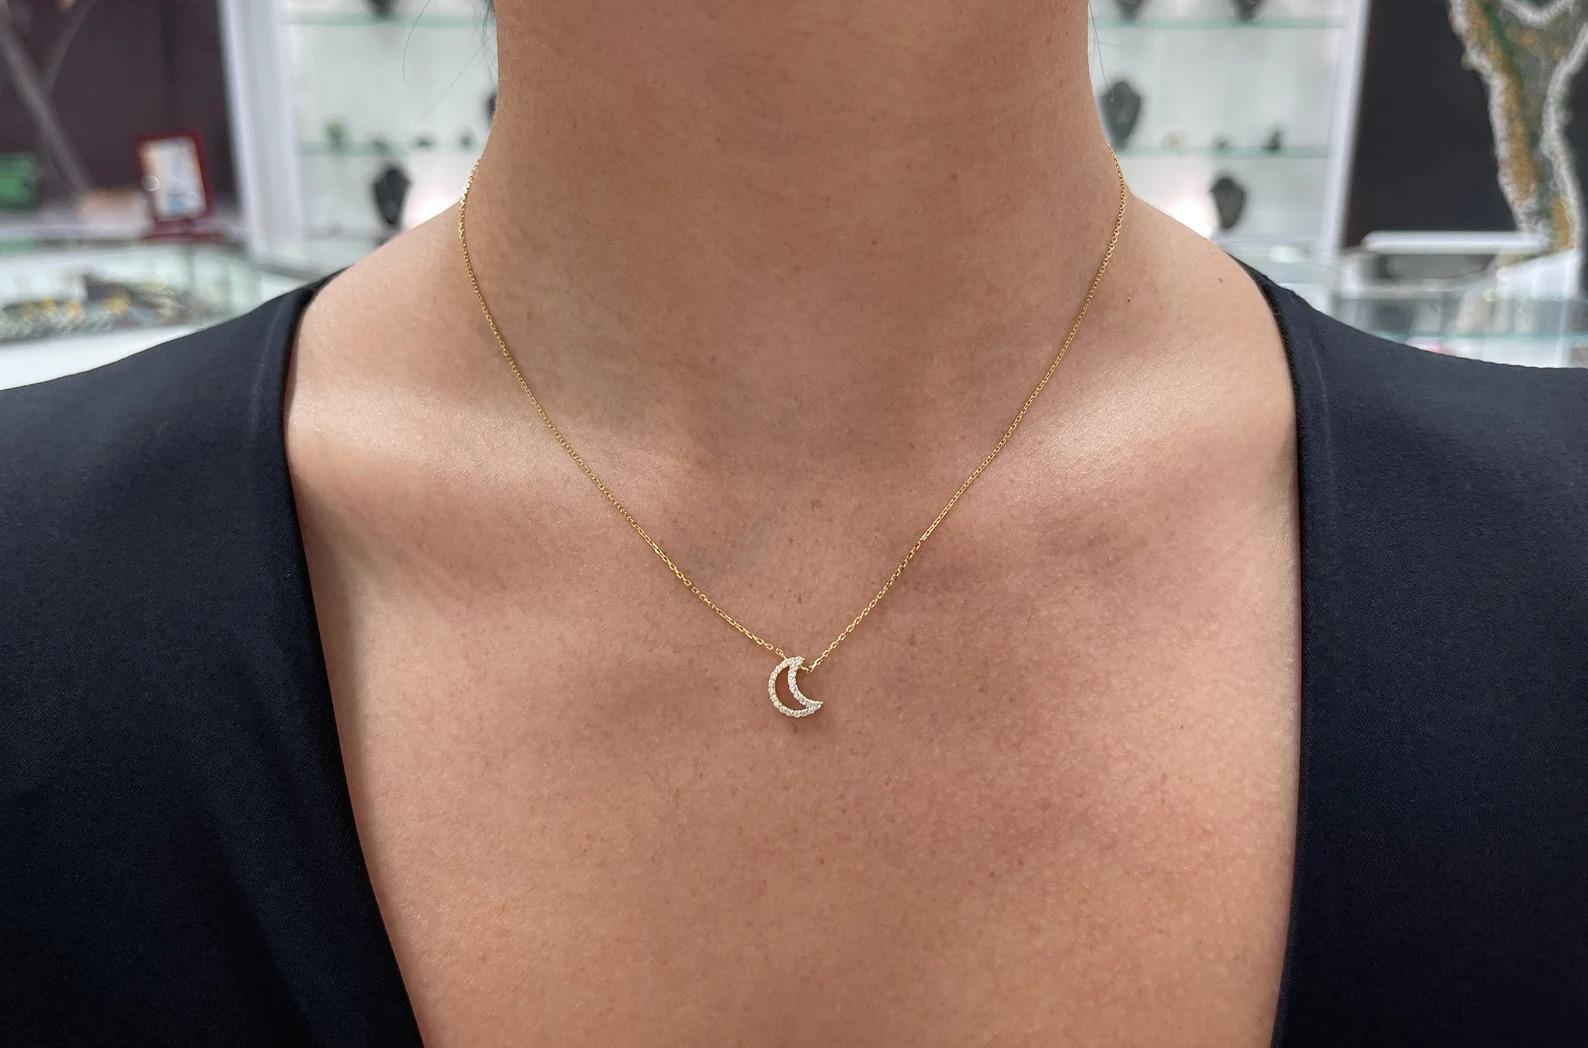 A petite, and gorgeous open crescent moon necklace; featuring numerous natural high-quality petite brilliant round cut diamonds. Pave set within a 14K gold setting, attached to an adjustable 14-18 inch cable chain necklace.

Setting Style: